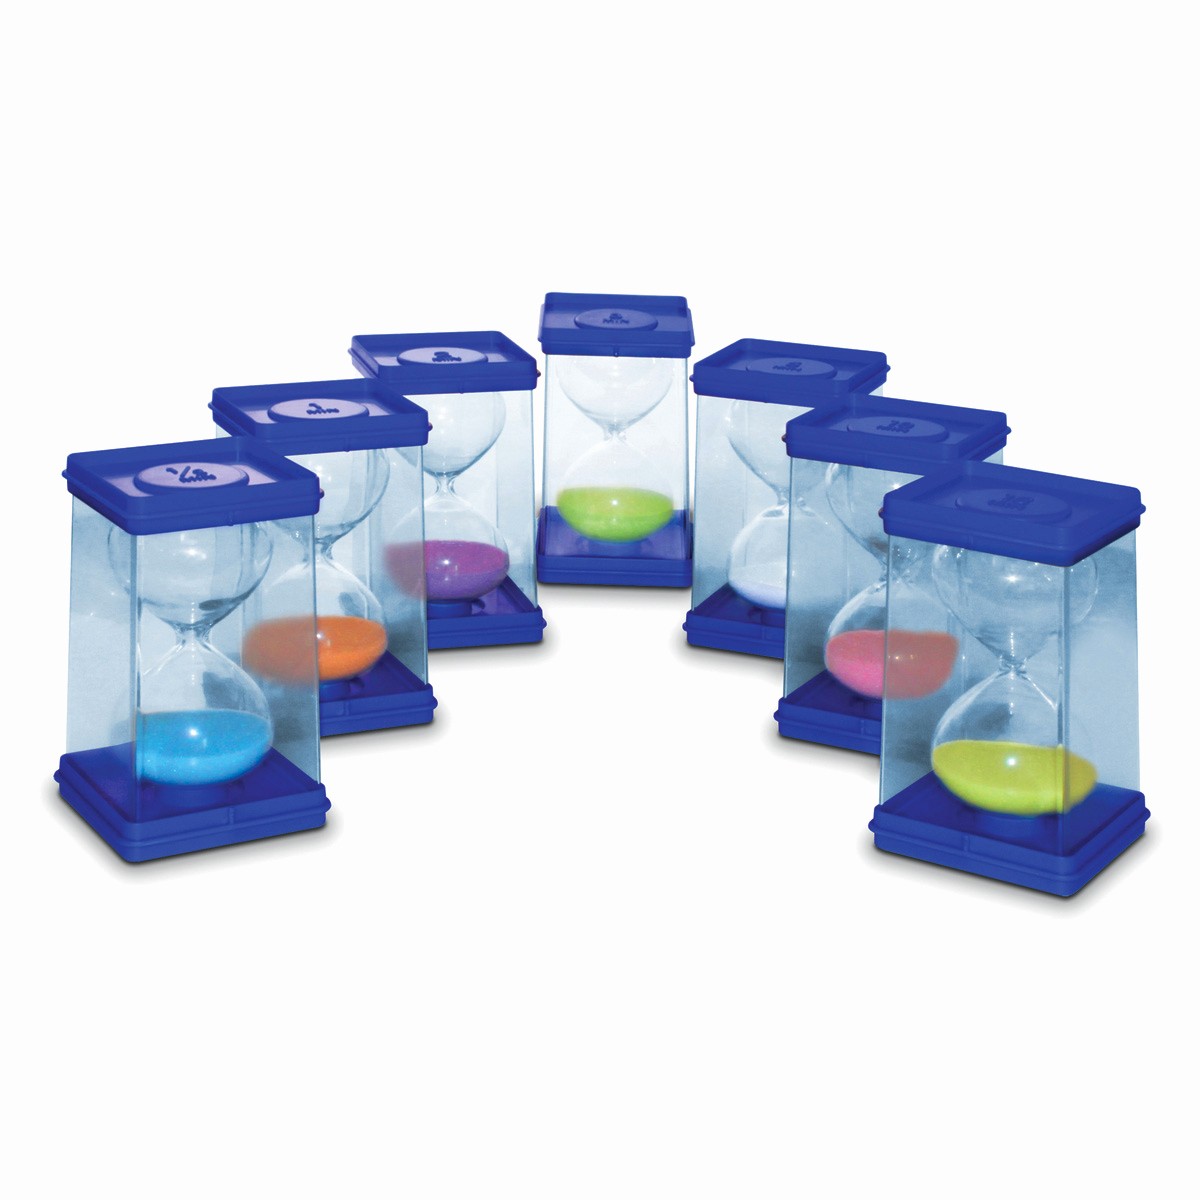 Set A 15 Min Timer Awesome Buy Invicta Sand Timers Set Of 7 30 Seconds 1 2